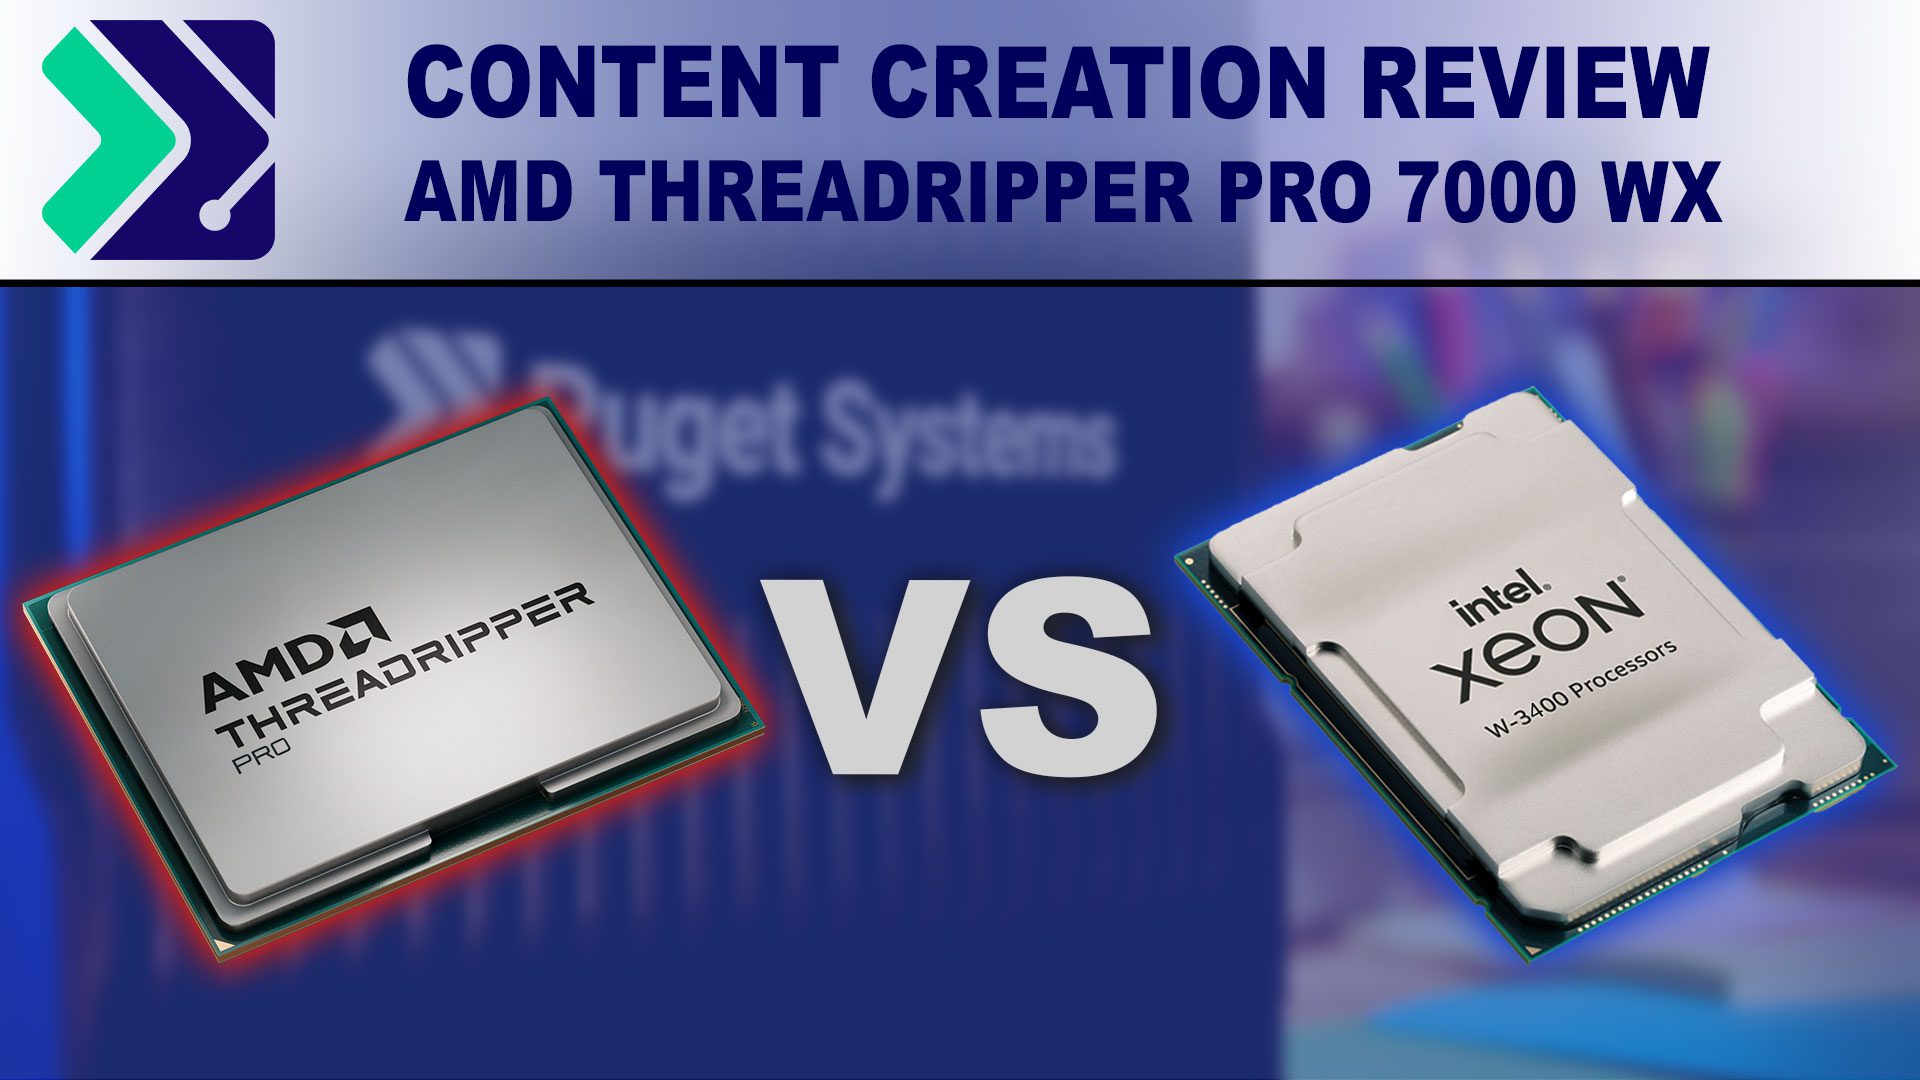 Decorative image: AMD Threadripper PRO 7000 WX content creation review.